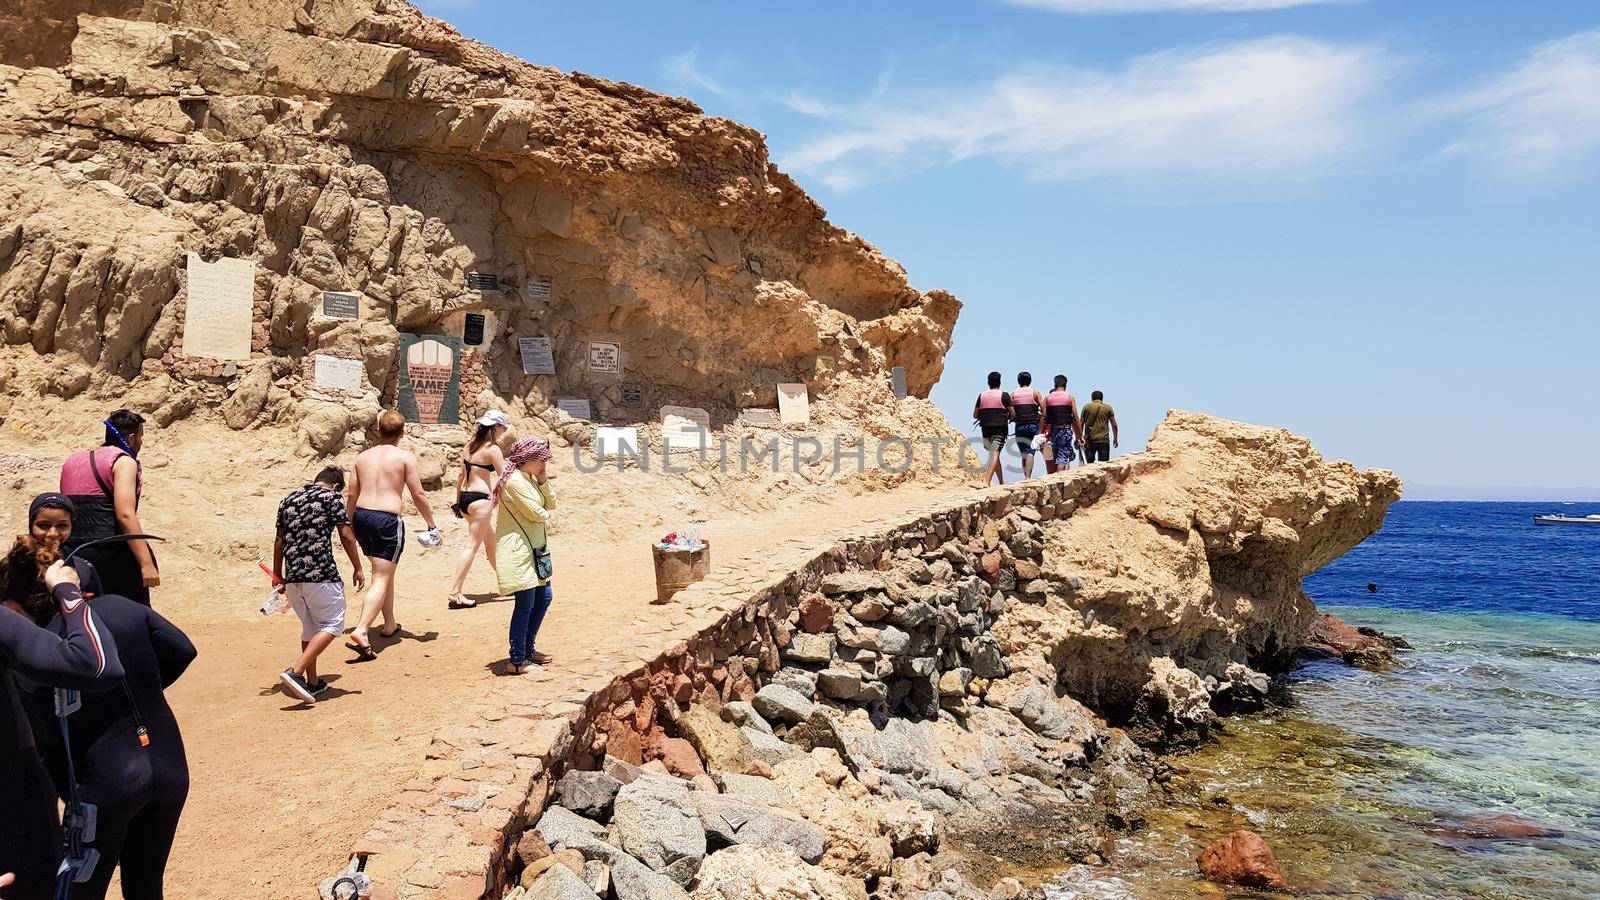 Egypt, Dahab - October 17, 2019: The Blue Hole is a popular diving spot in East Sinai. Sunny beach resort on the Red Sea in Dahab. A famous tourist destination near Sharm el Sheikh. Bright sunshine.